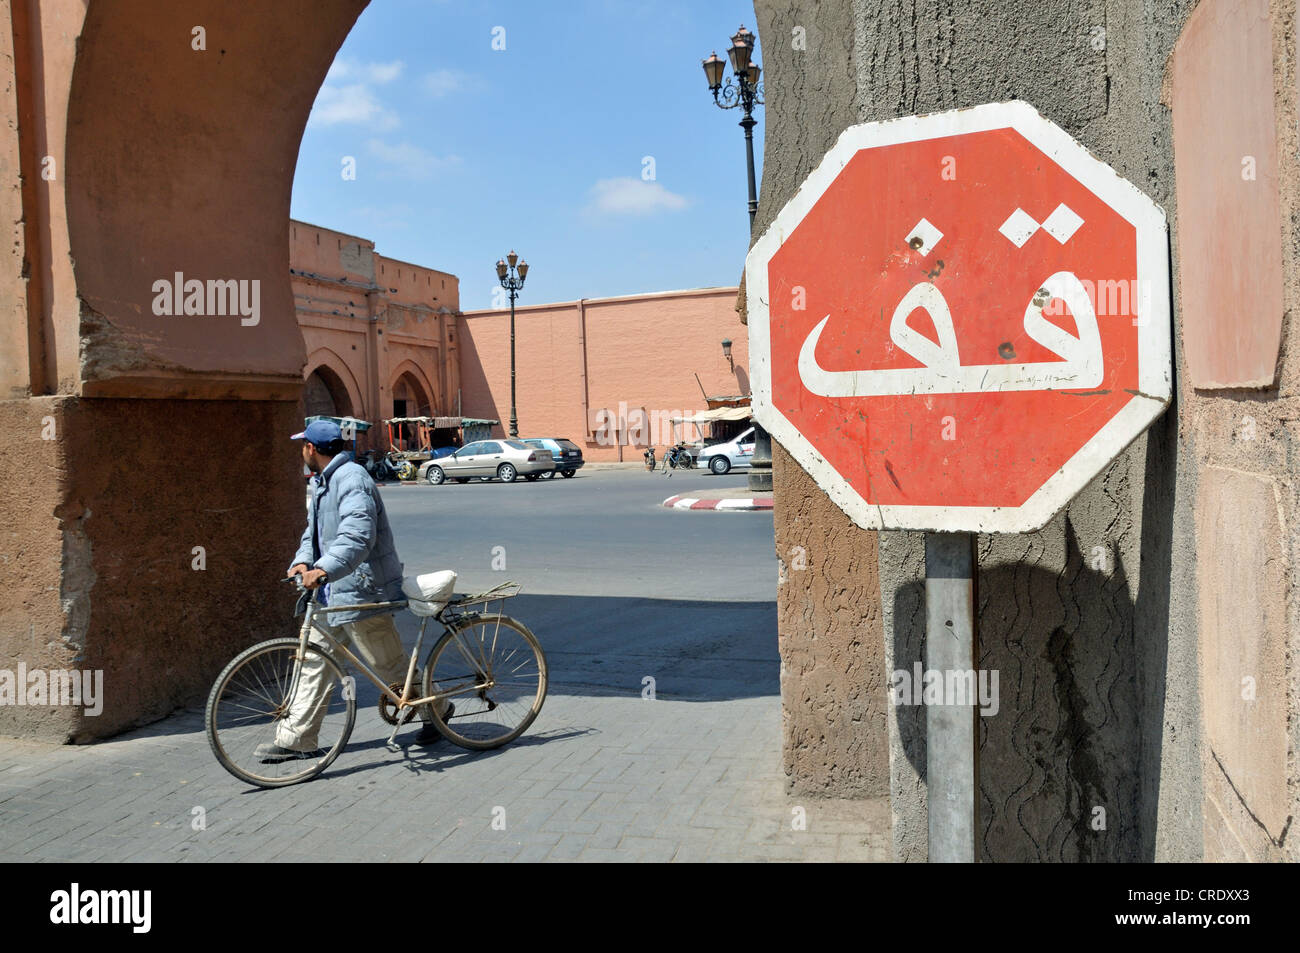 Stop sign in Arabic, Marrakech, Morocco, Africa, PublicGround Stock Photo